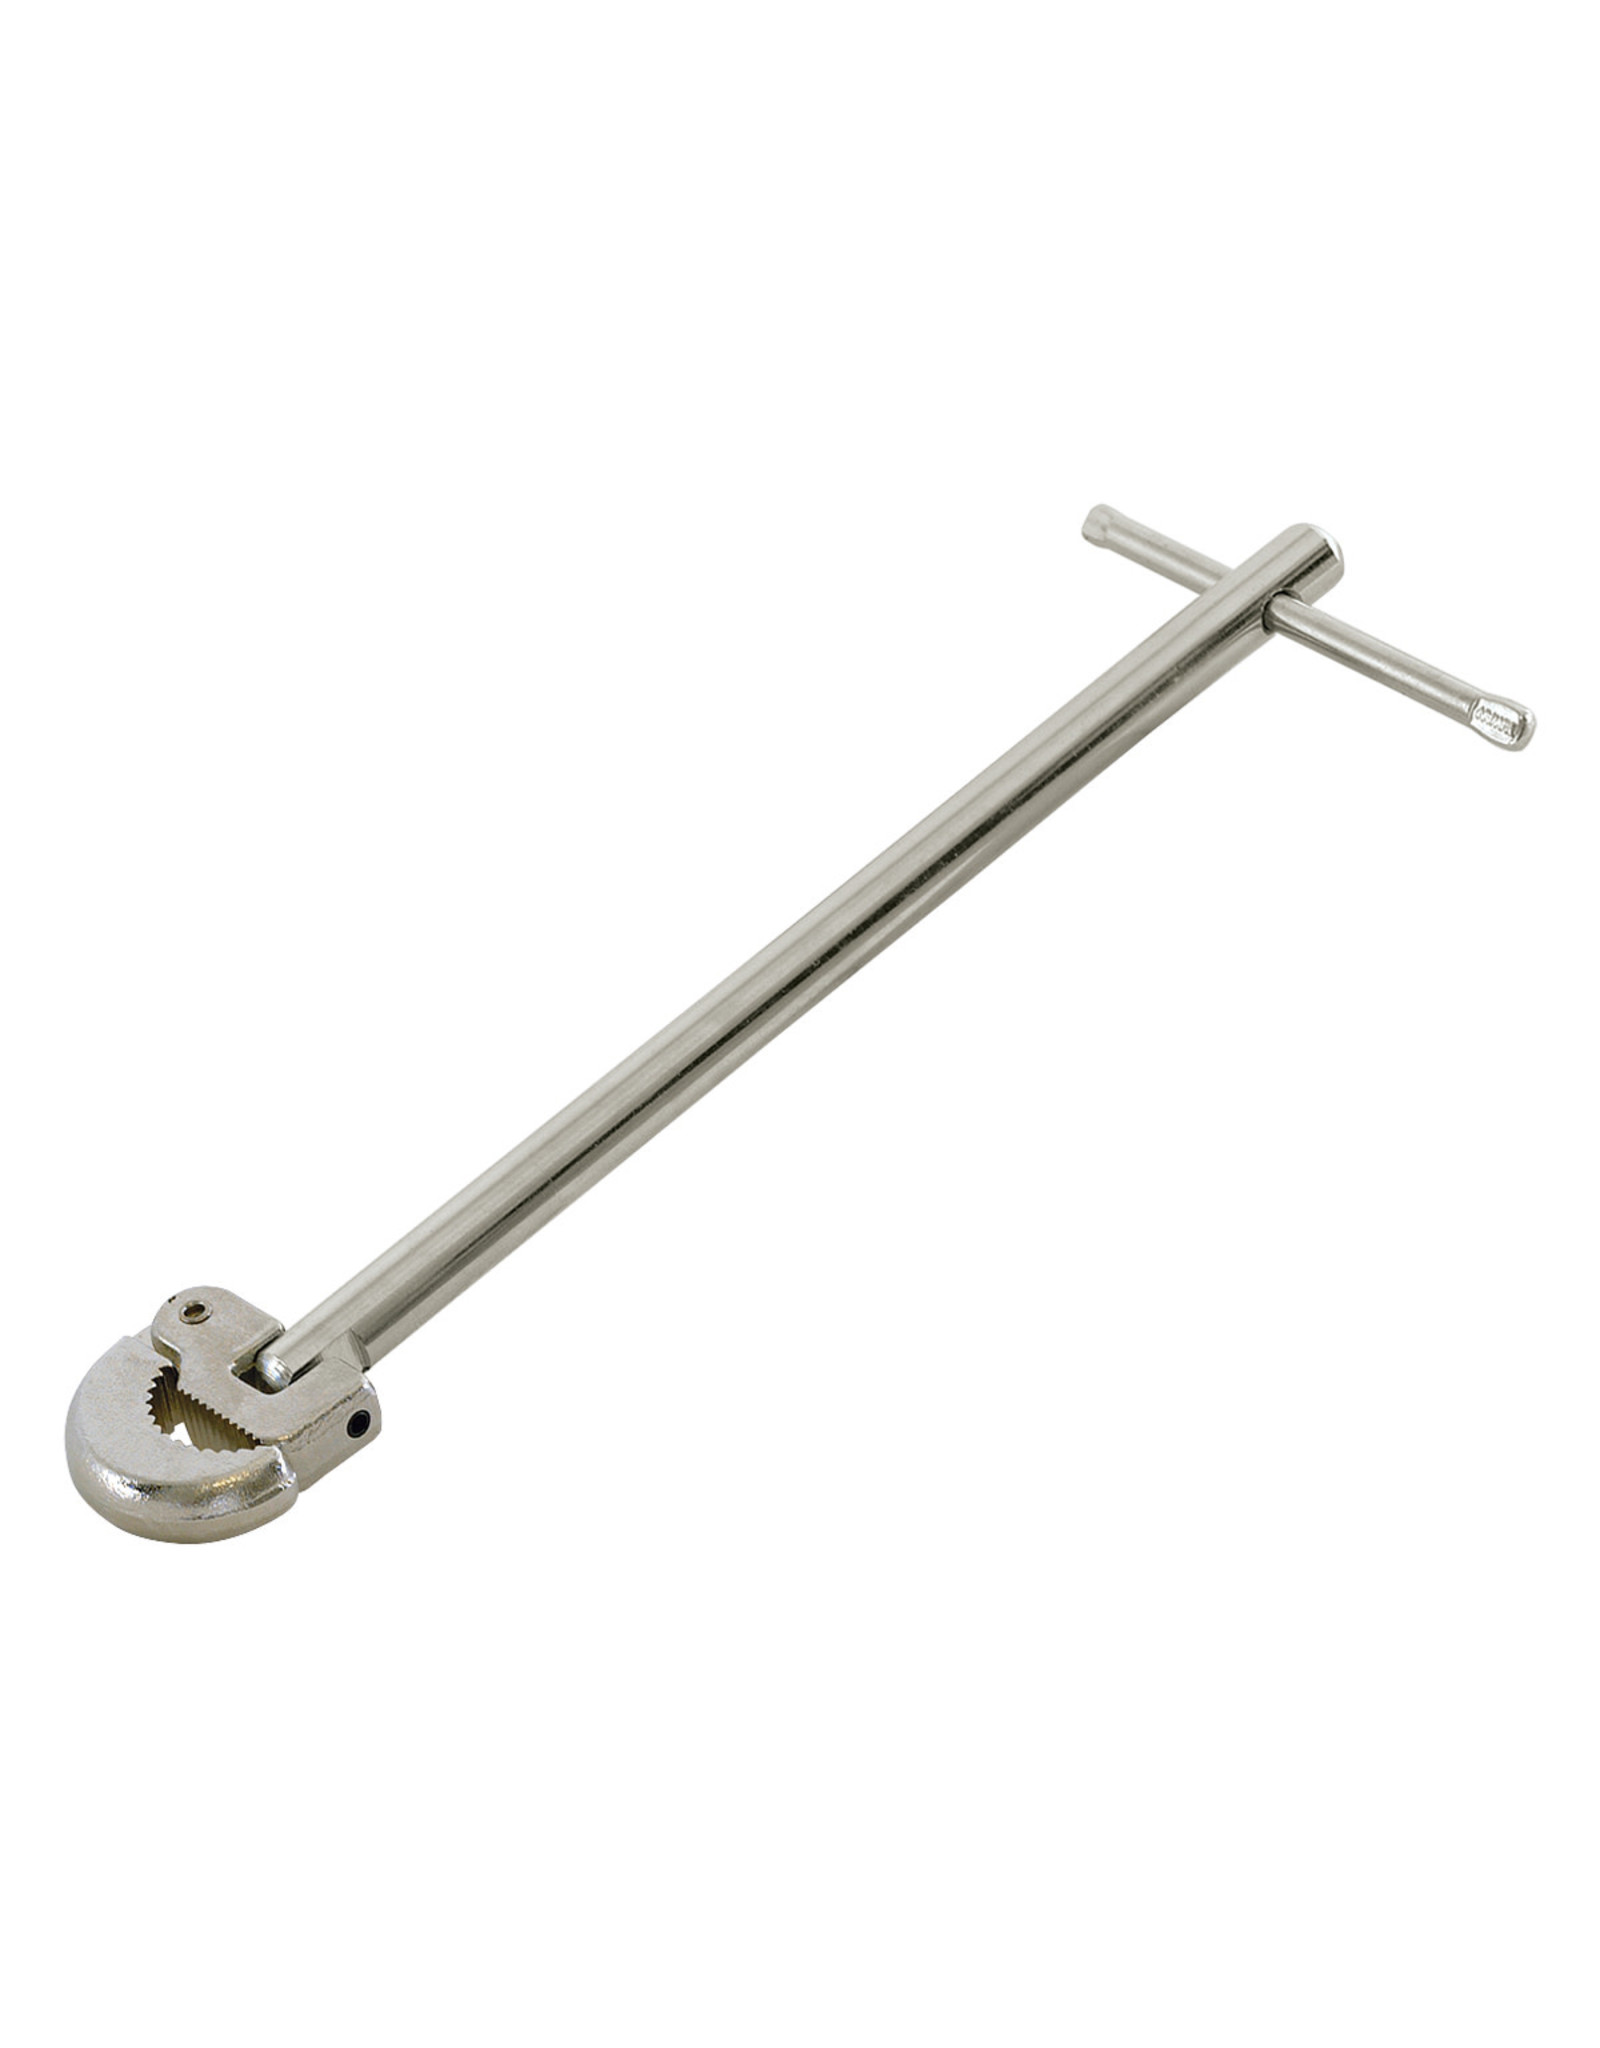 9″ to 15″ Adjustable Basin Wrench